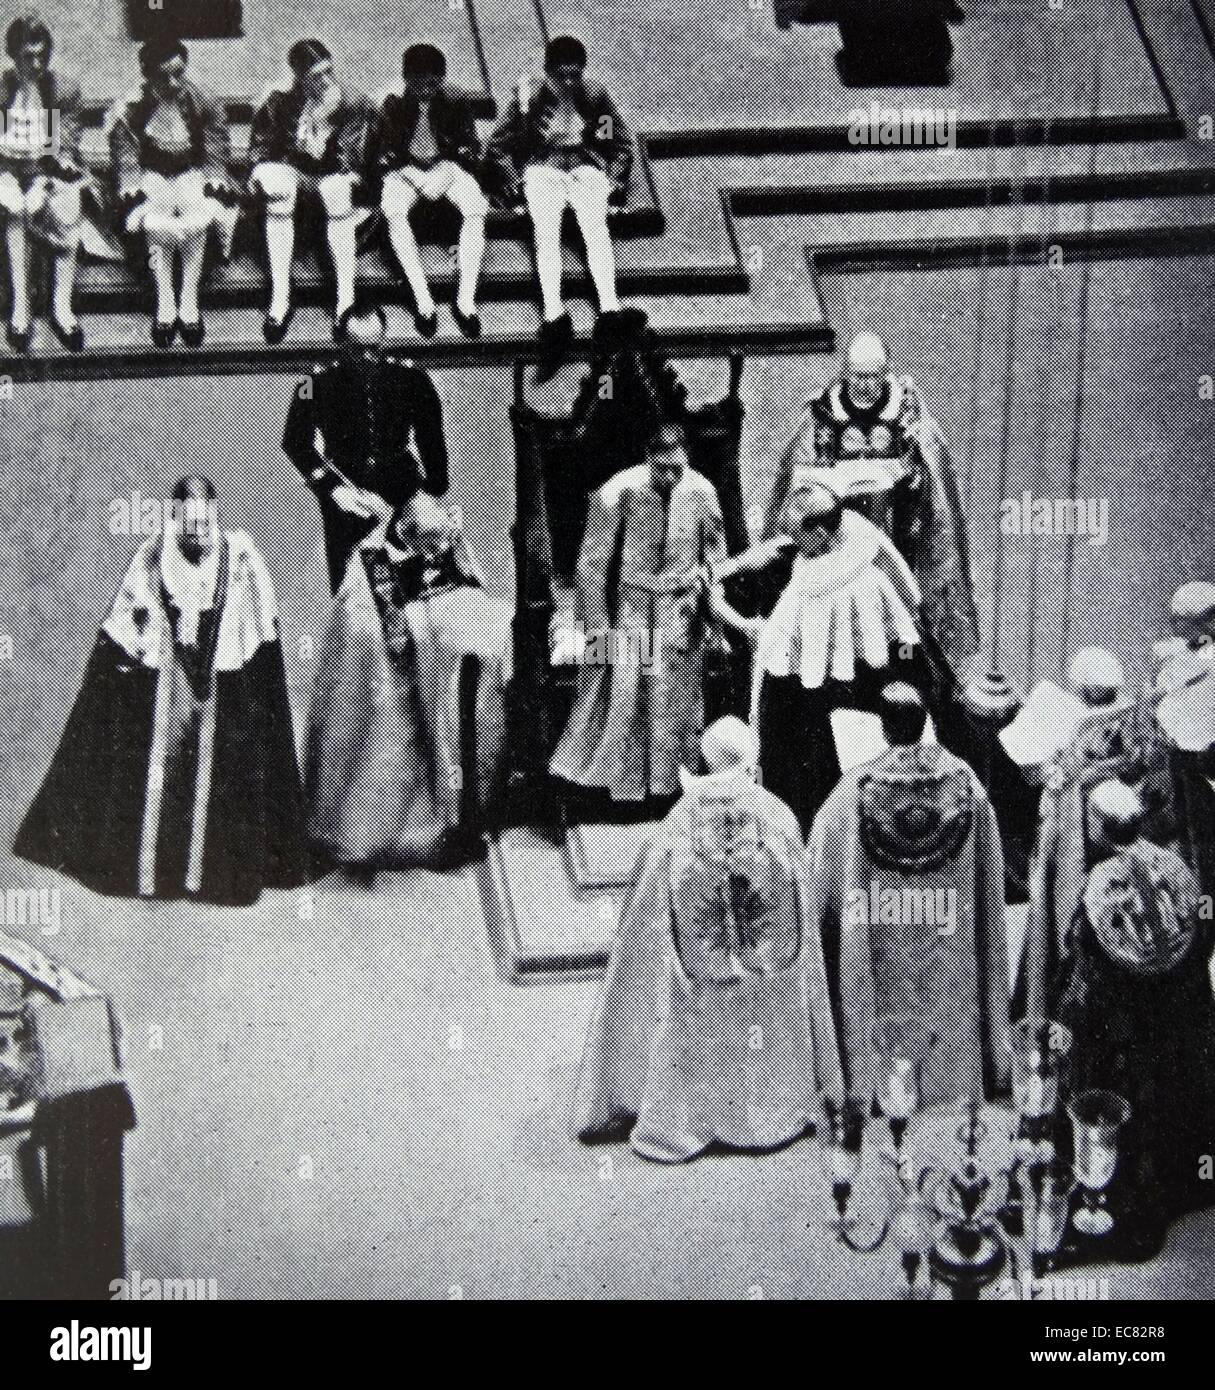 Photograph of King George VI (1895-1952) during his Coronation. Dated 1937 Stock Photo